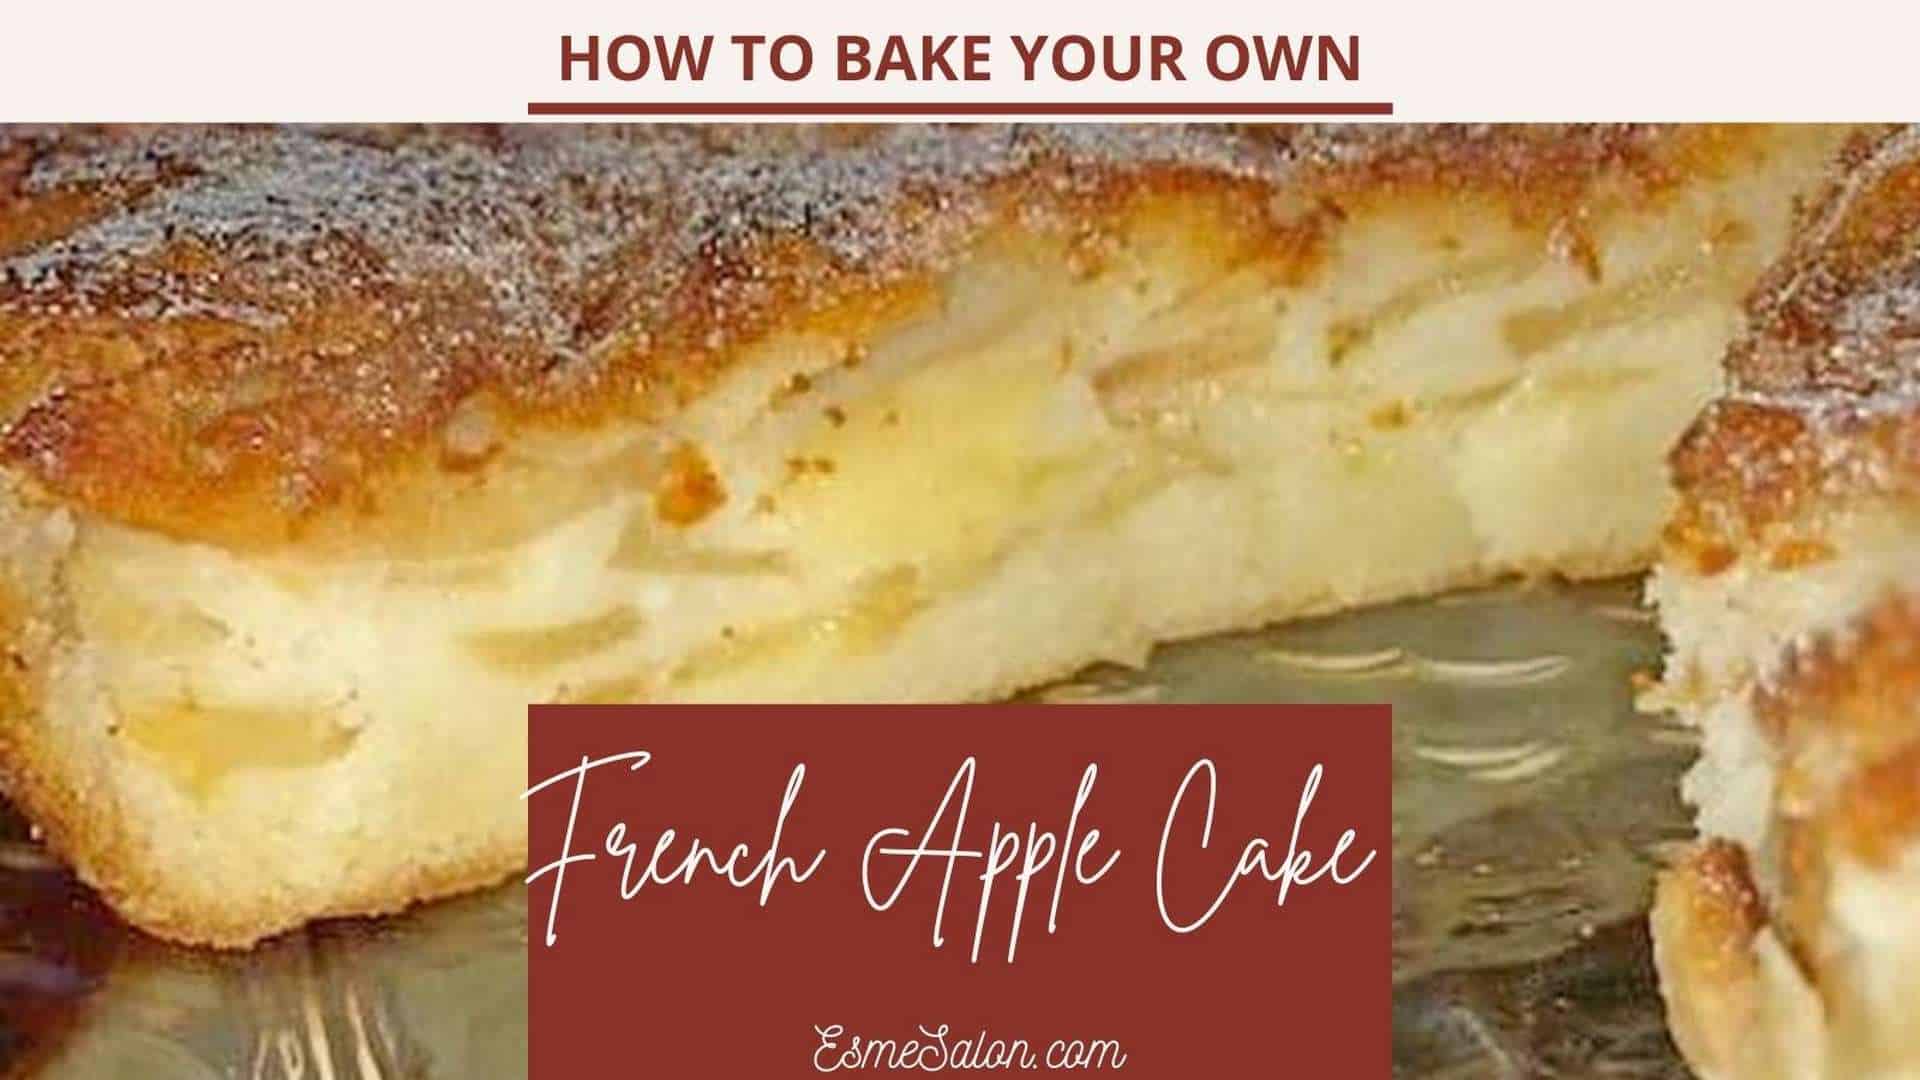 French Apple Cake made of Granny Smith apples and with Powdered sugar for dusting